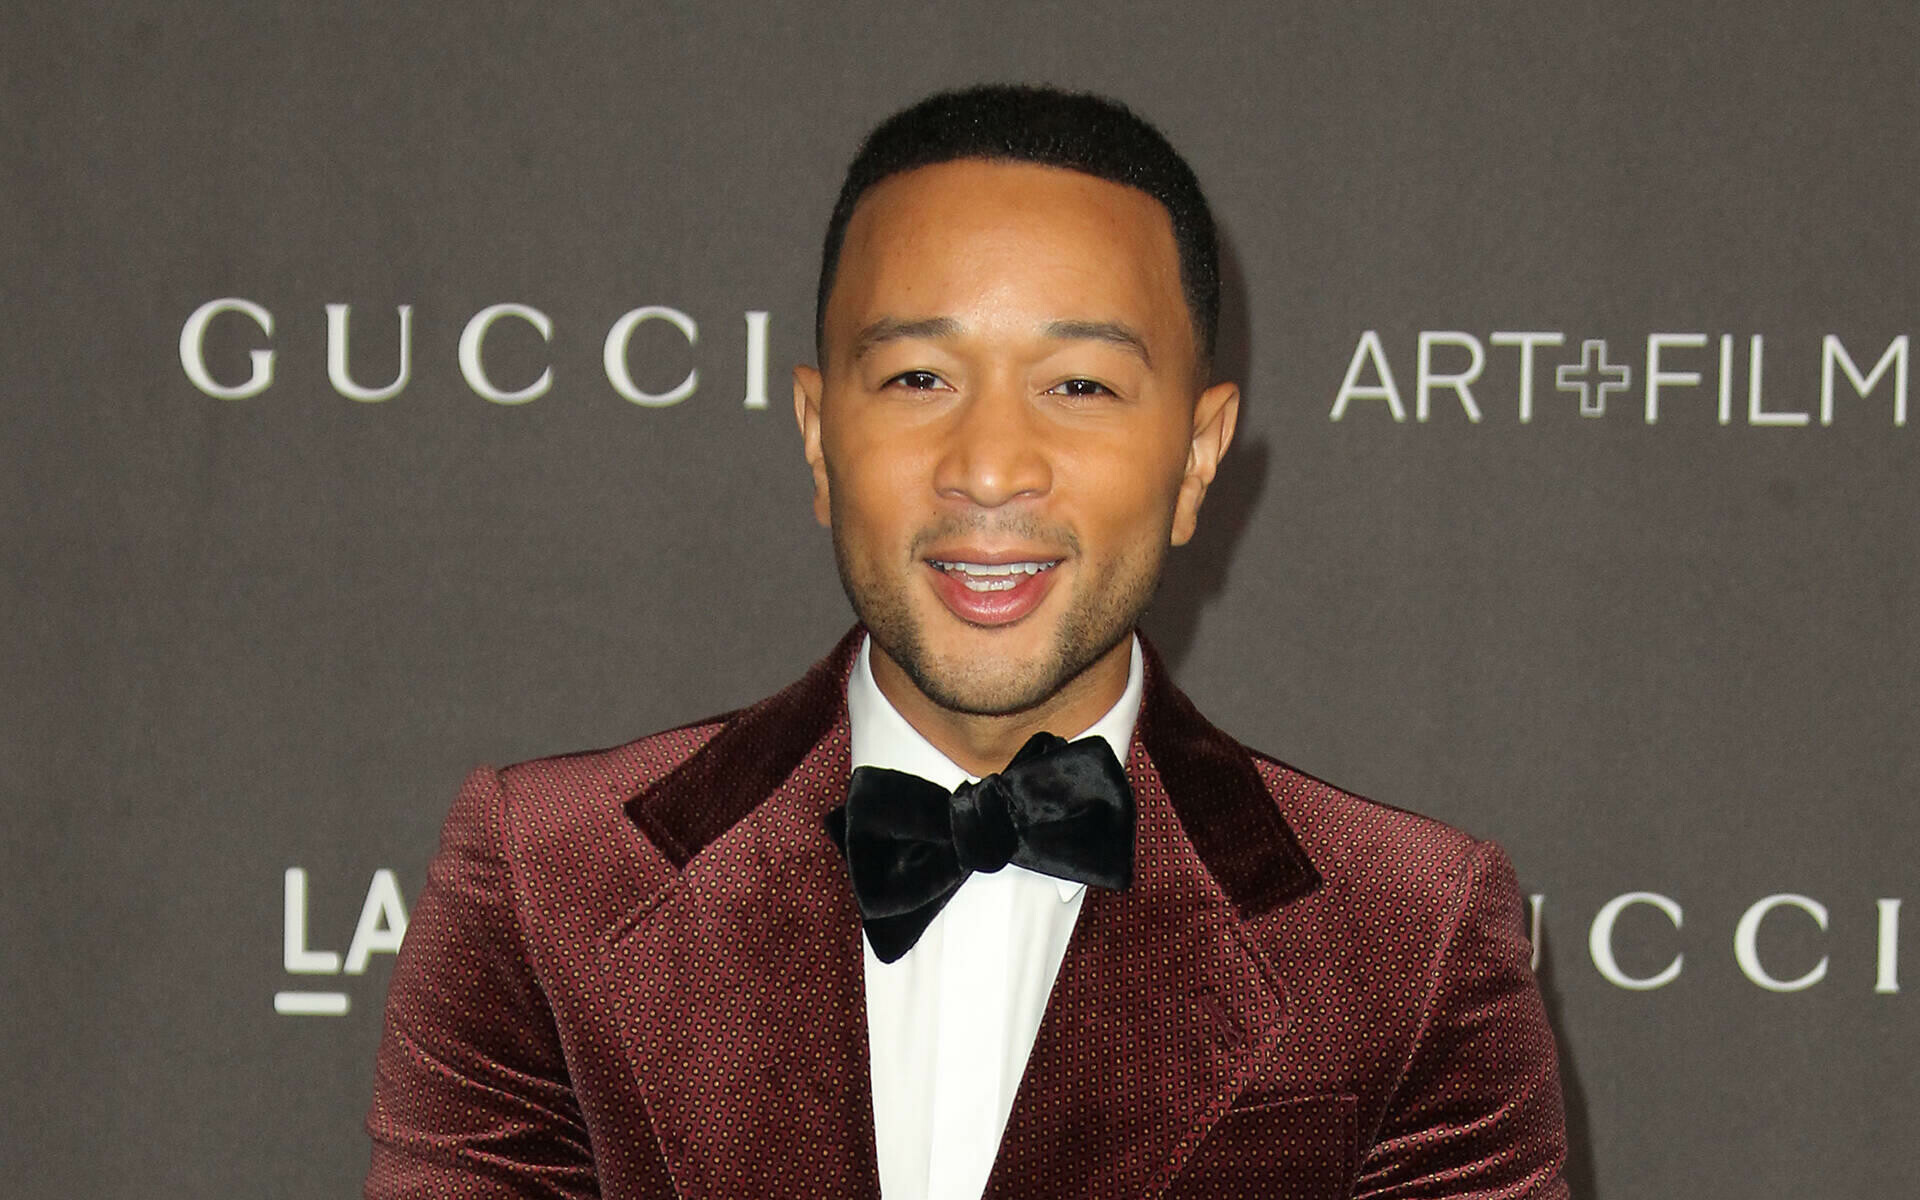 John Legend: "Ordinary People" received the Grammy Award for Best Male R&B Vocal Performance. 1920x1200 HD Wallpaper.